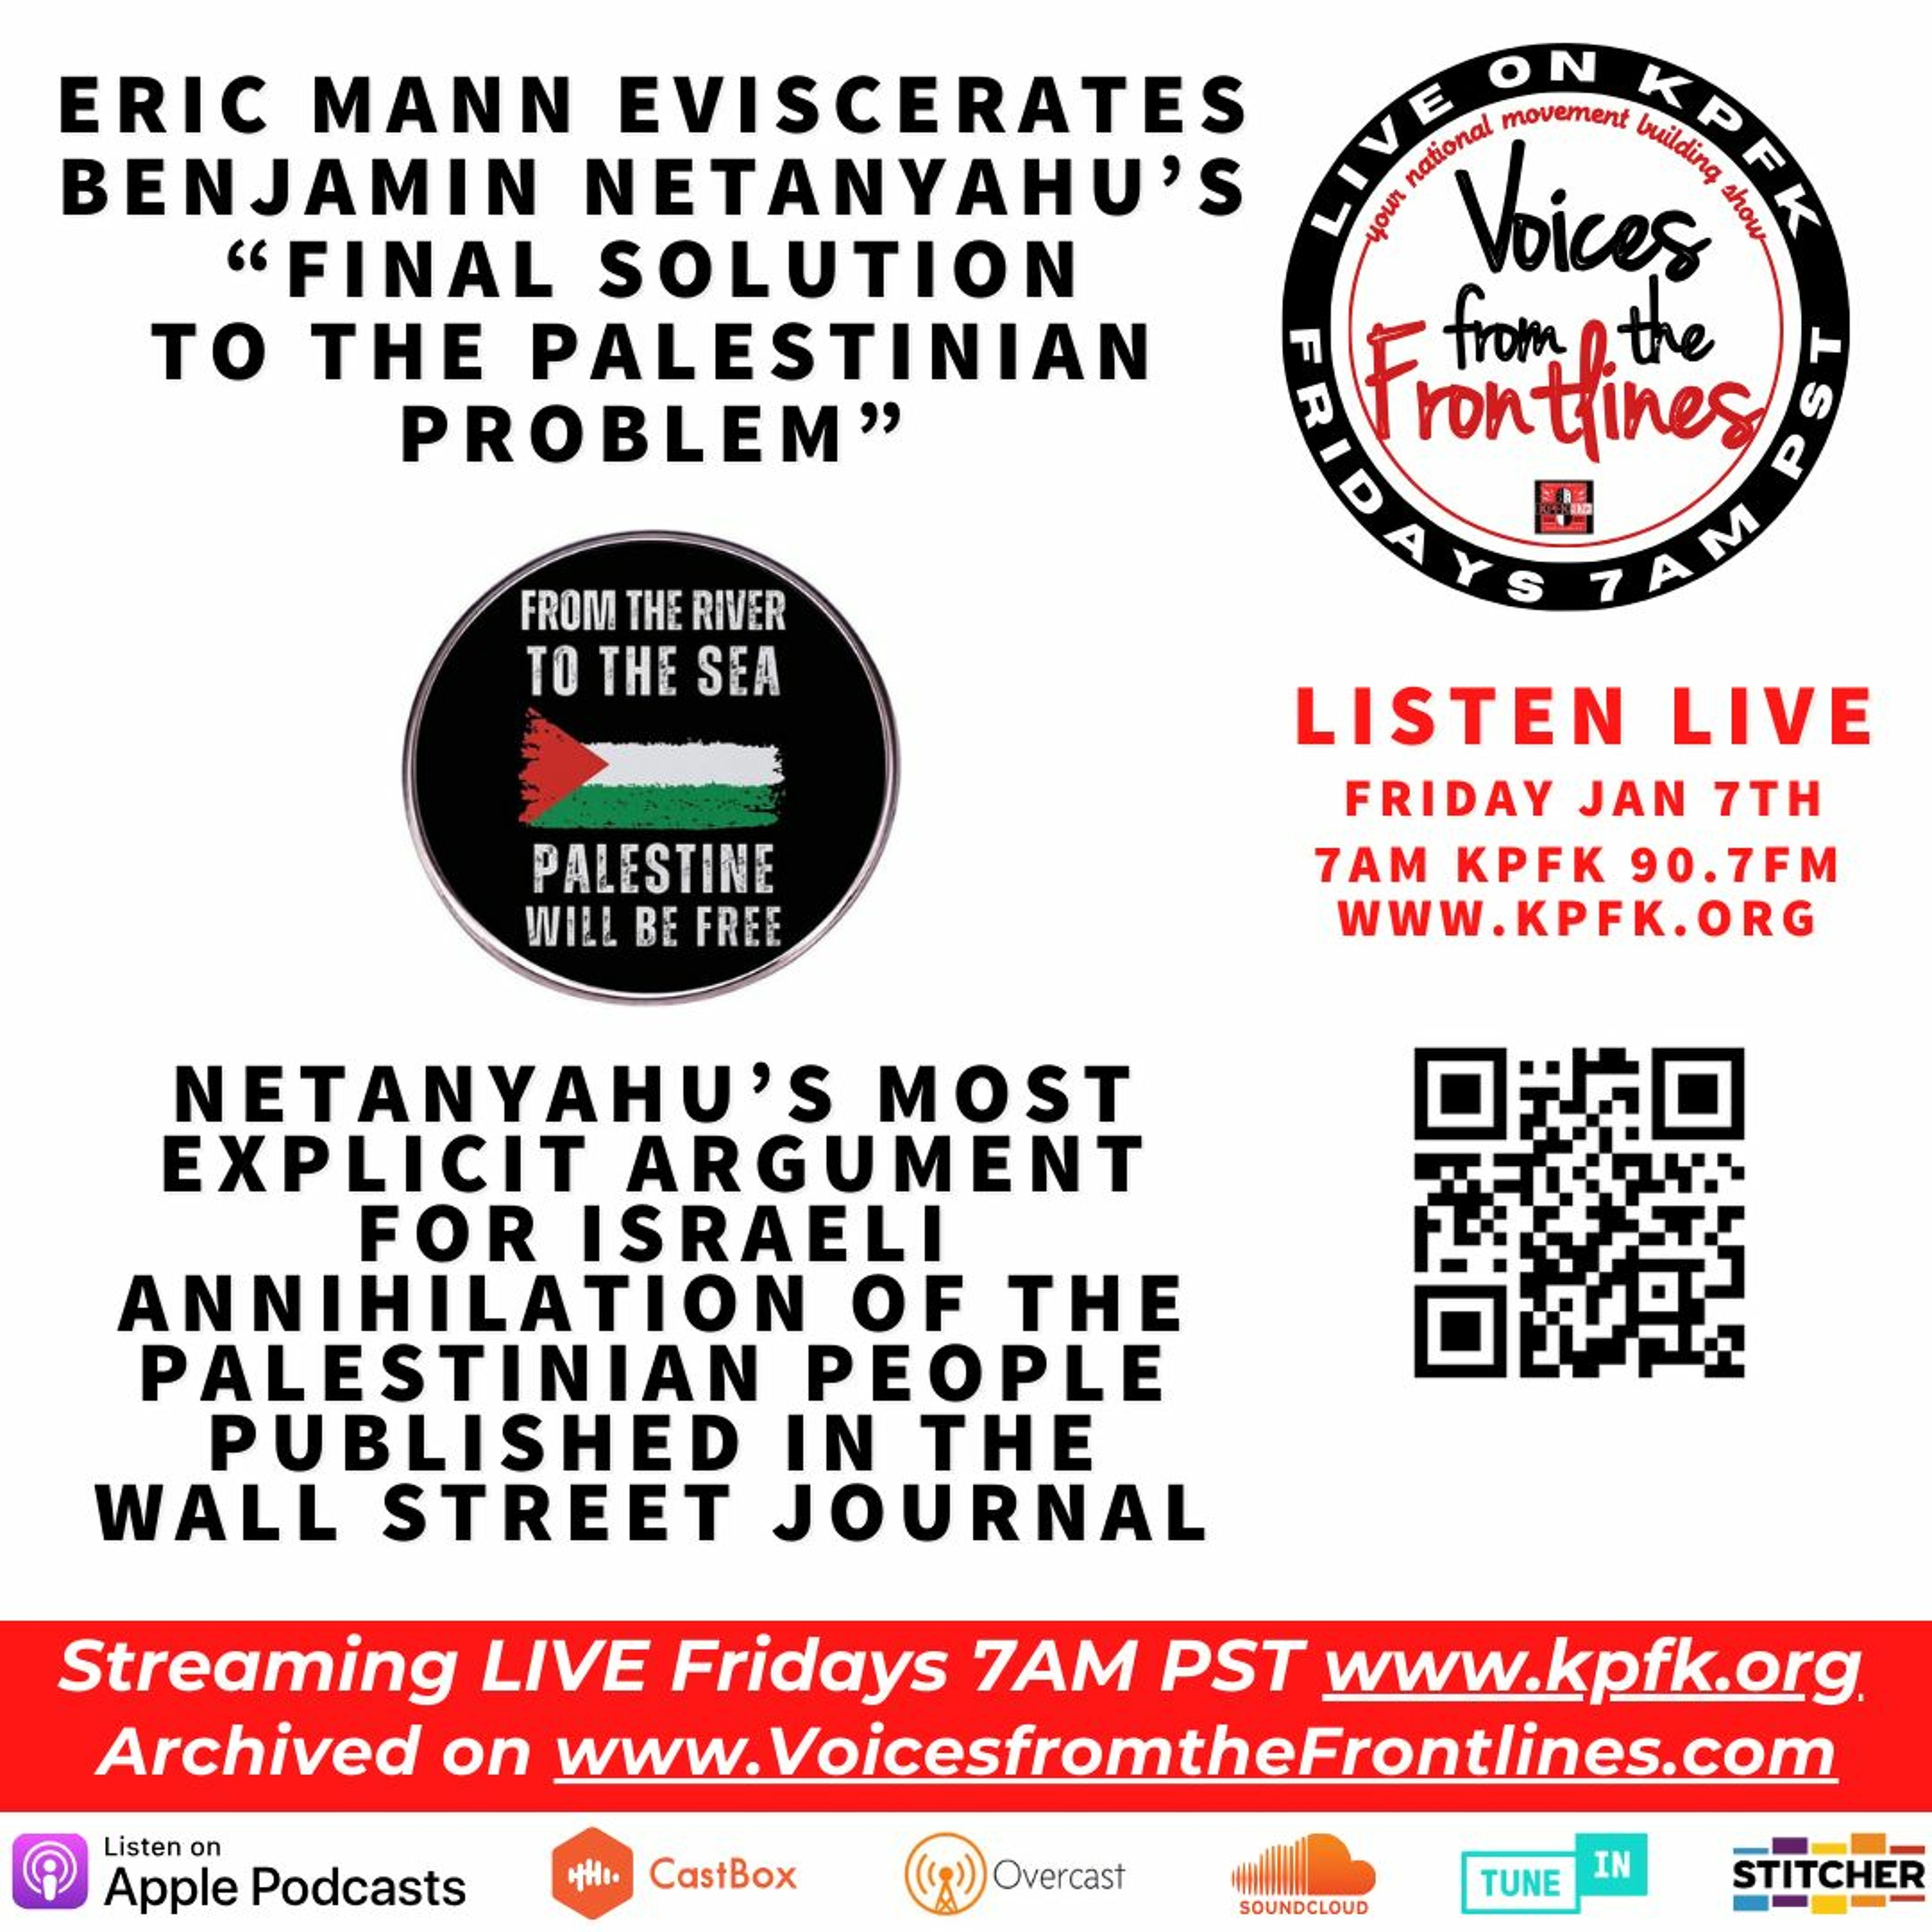 Voices Radio: Eric Mann eviscerates Benjamin Netanyahu’s “Final Solution to the Palestinian Problem”